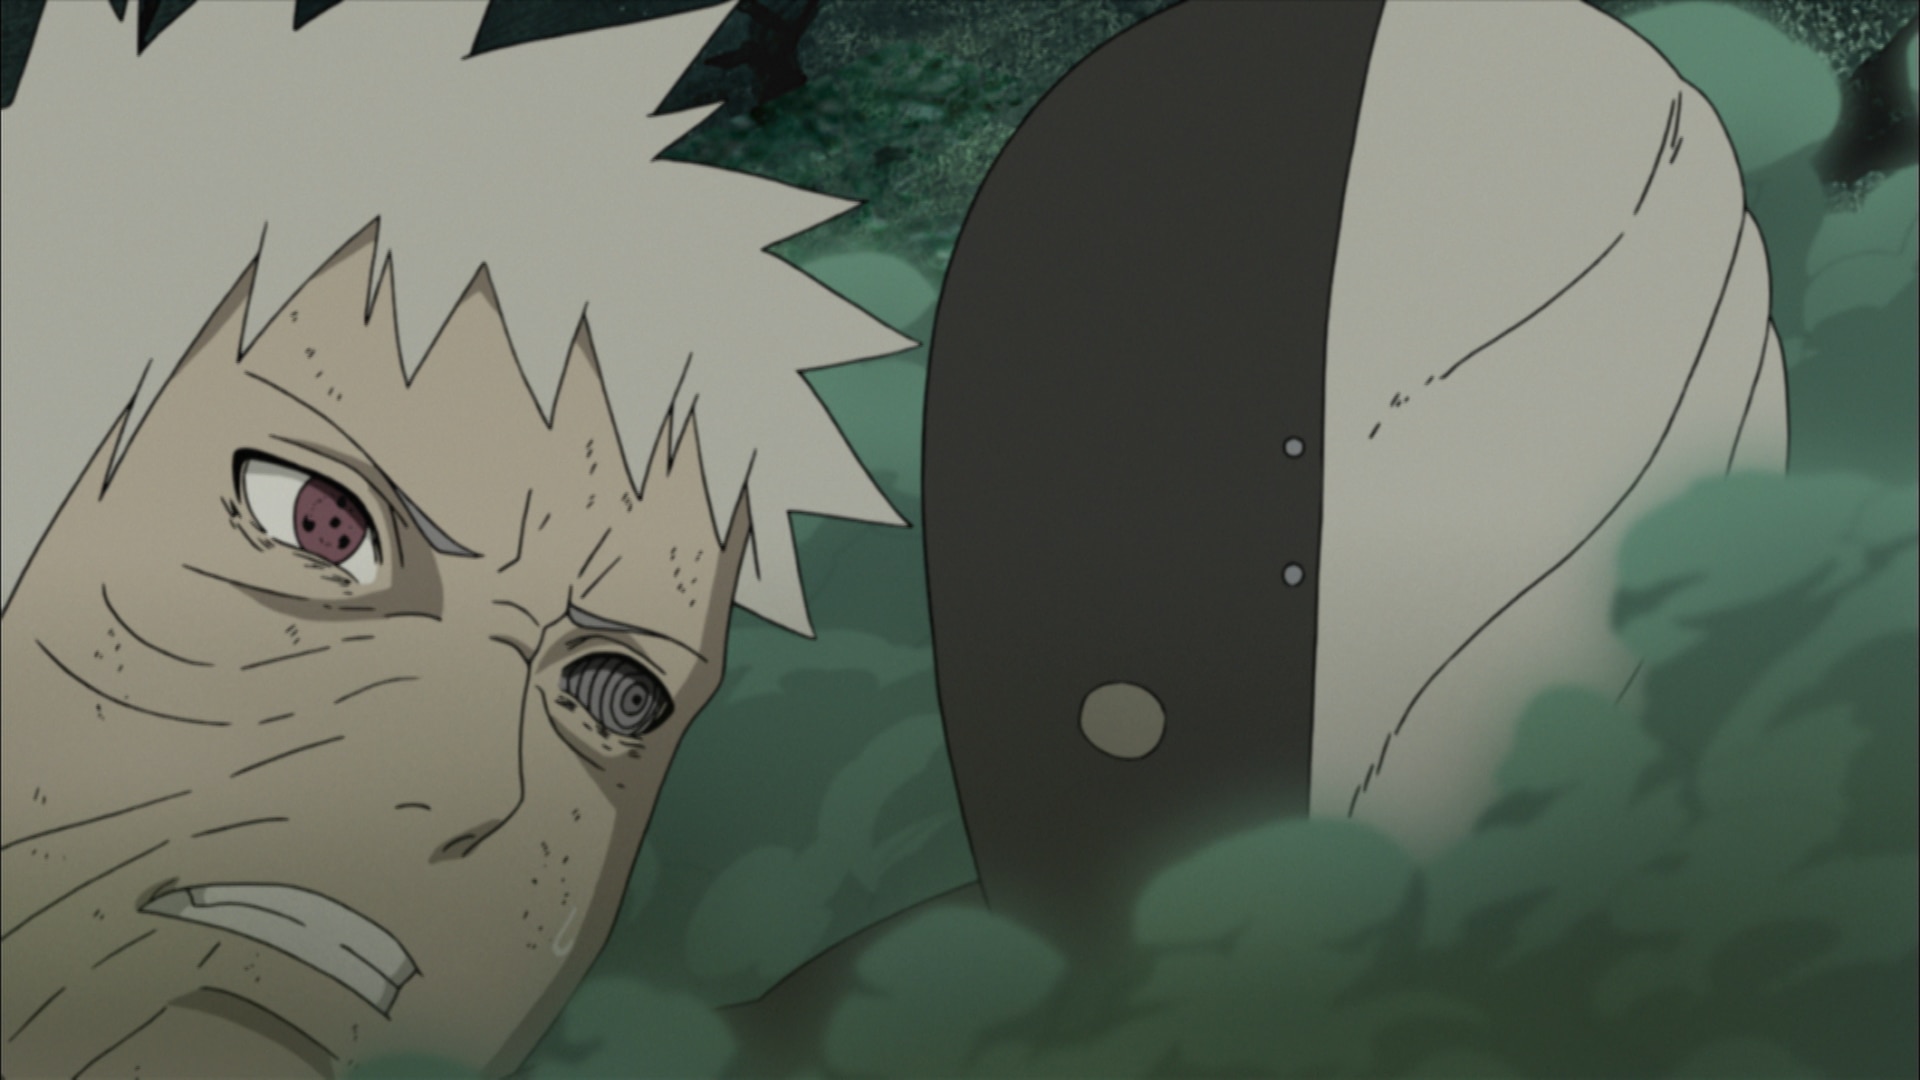 Obito Uchiha screenshots, images and pictures - Giant Bomb